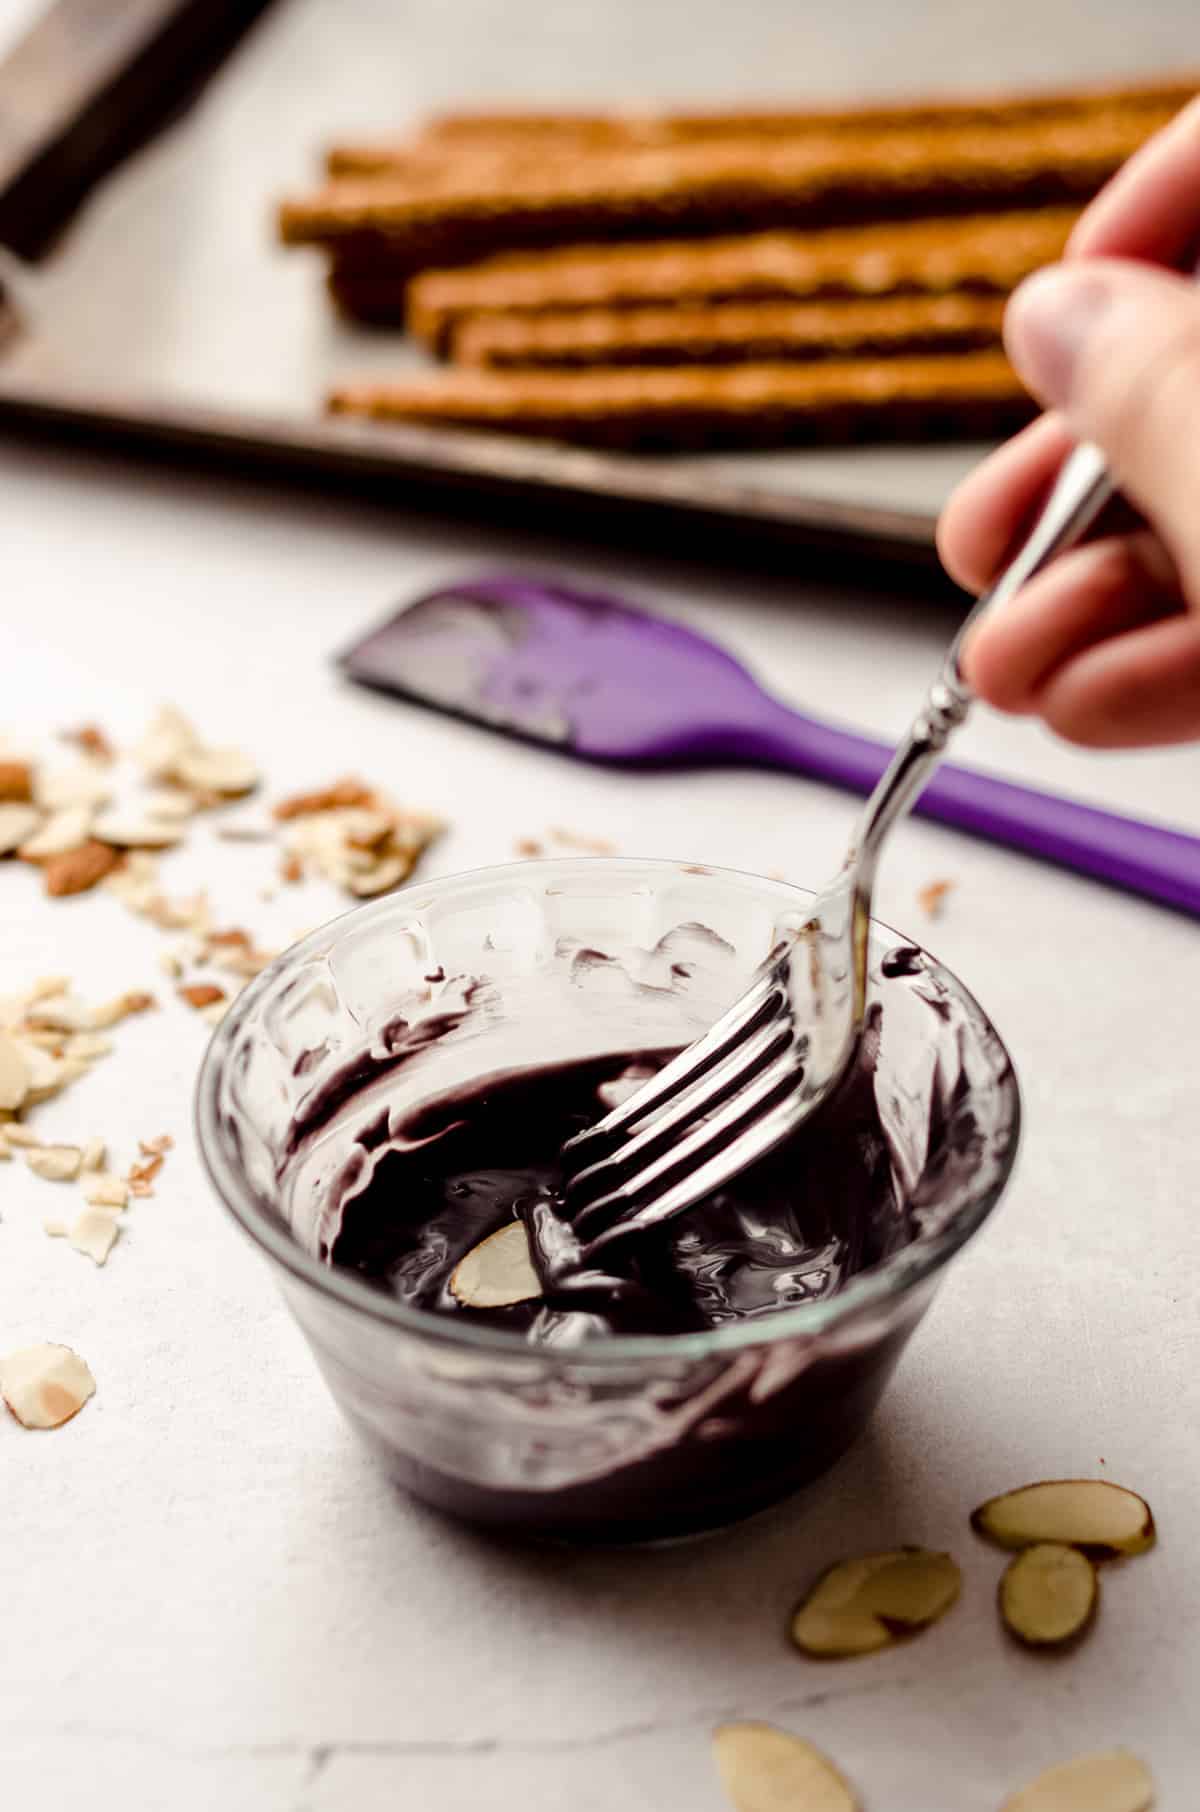 dipping slivered almonds into black candy melts to make nails on witch finger pretzels